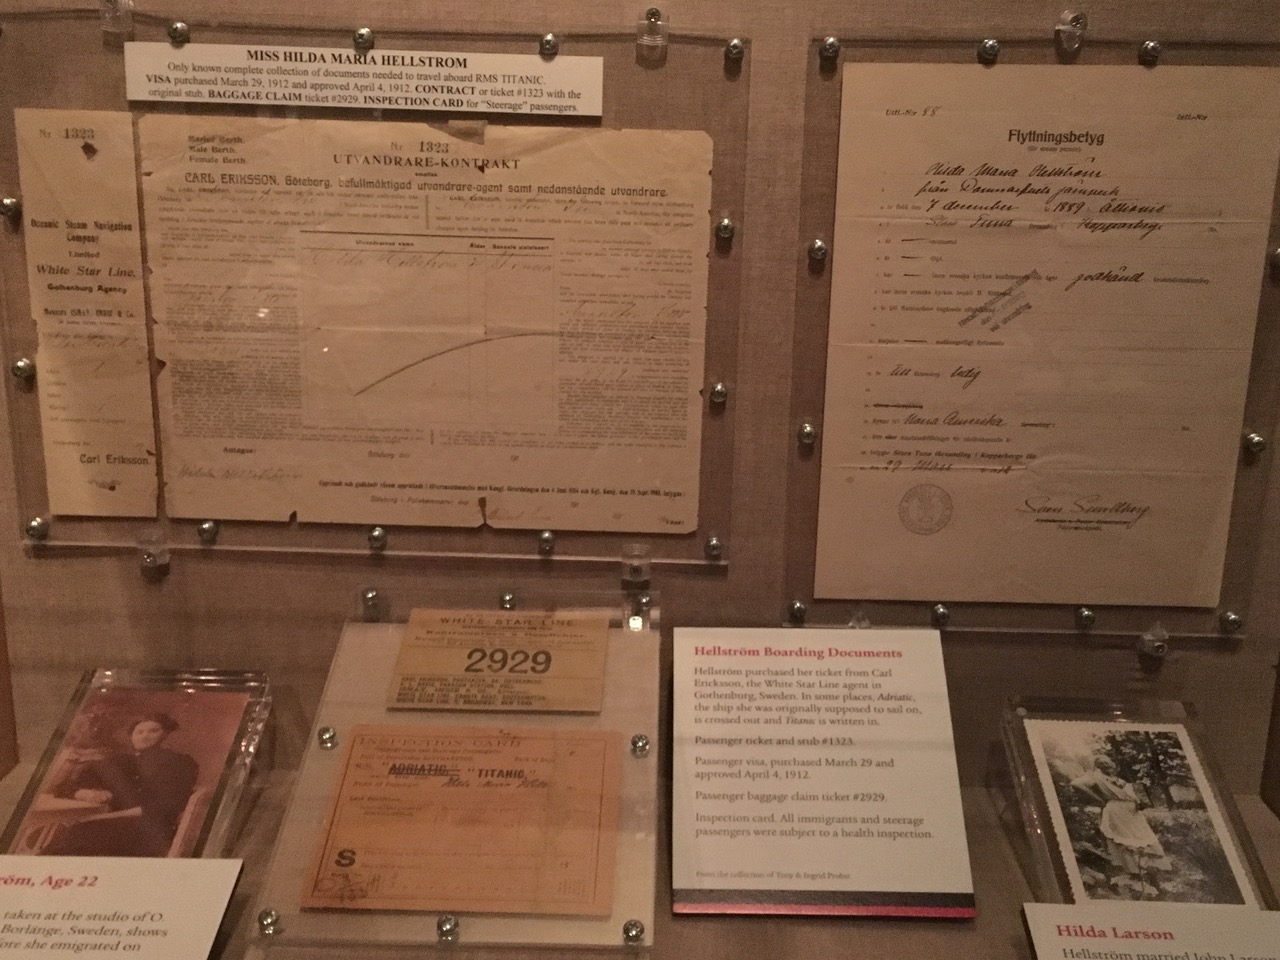 Authentic RMS Titanic admission tickets, at the Reagan Library